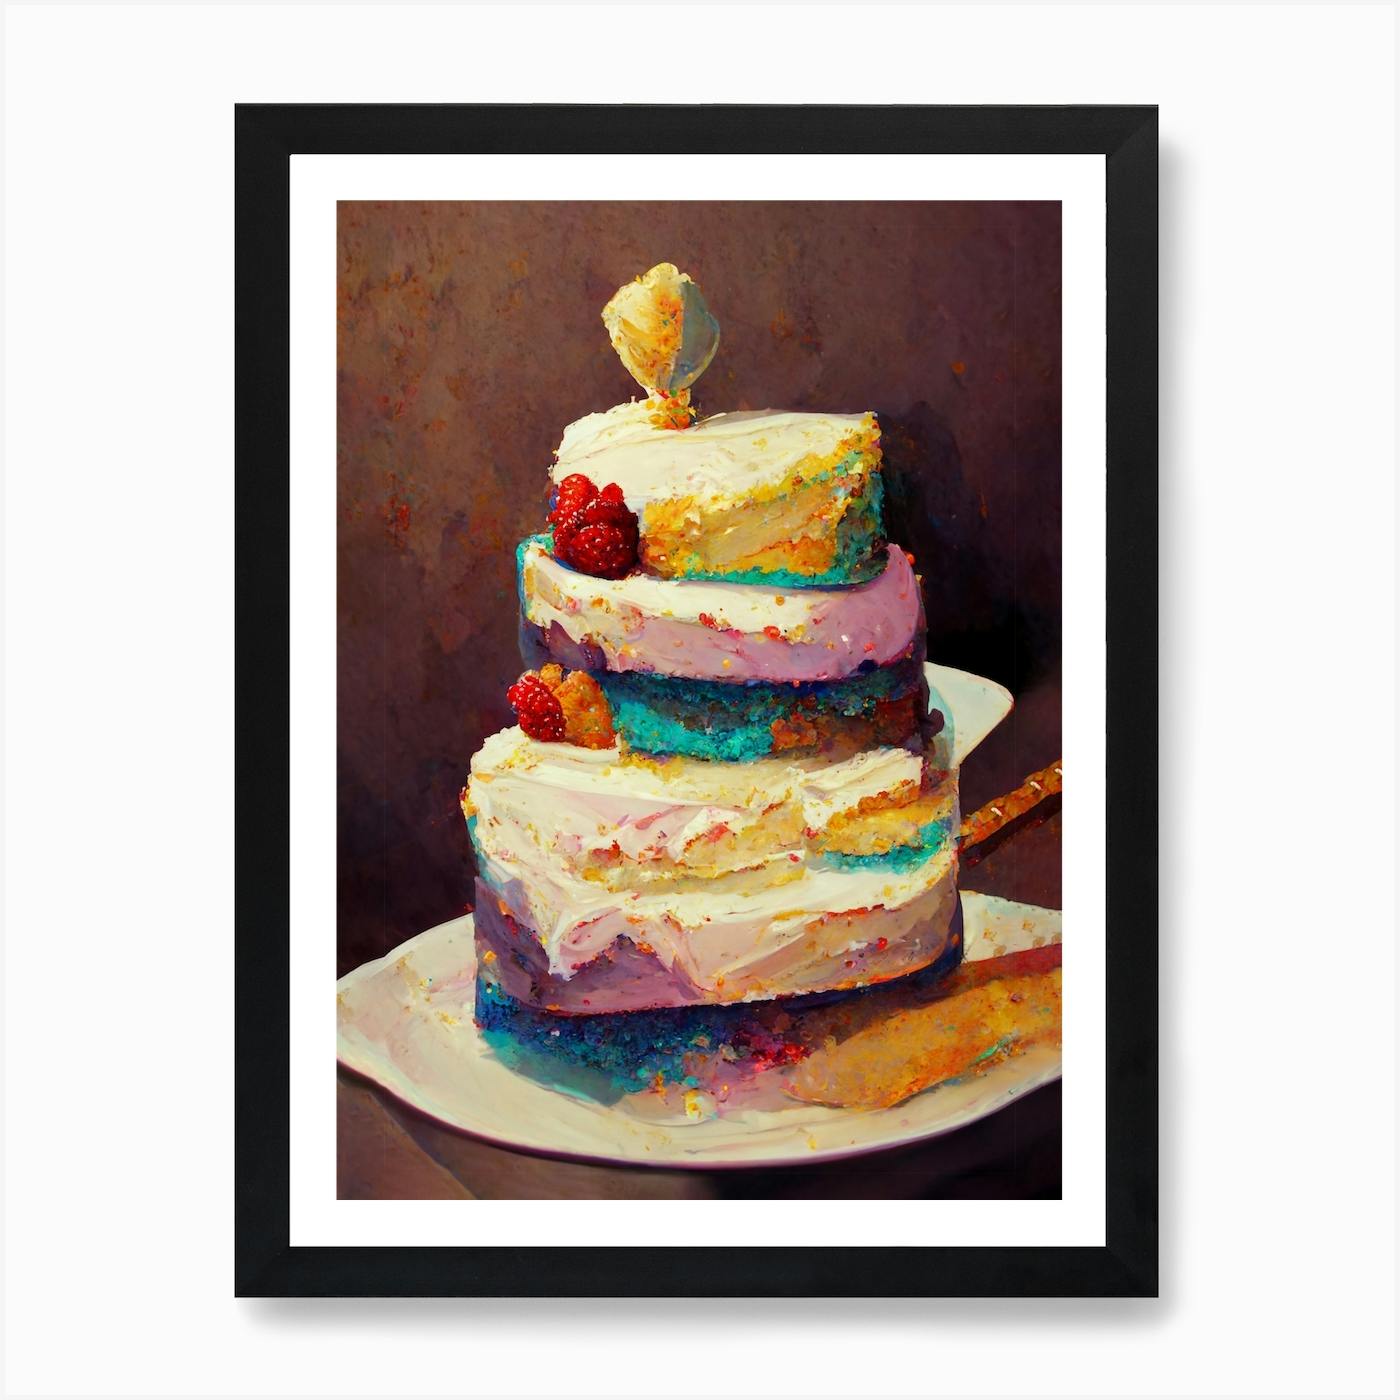 50 Best Birthday Cake Ideas in 2022 : Ombre Pink and Orange Art Cake